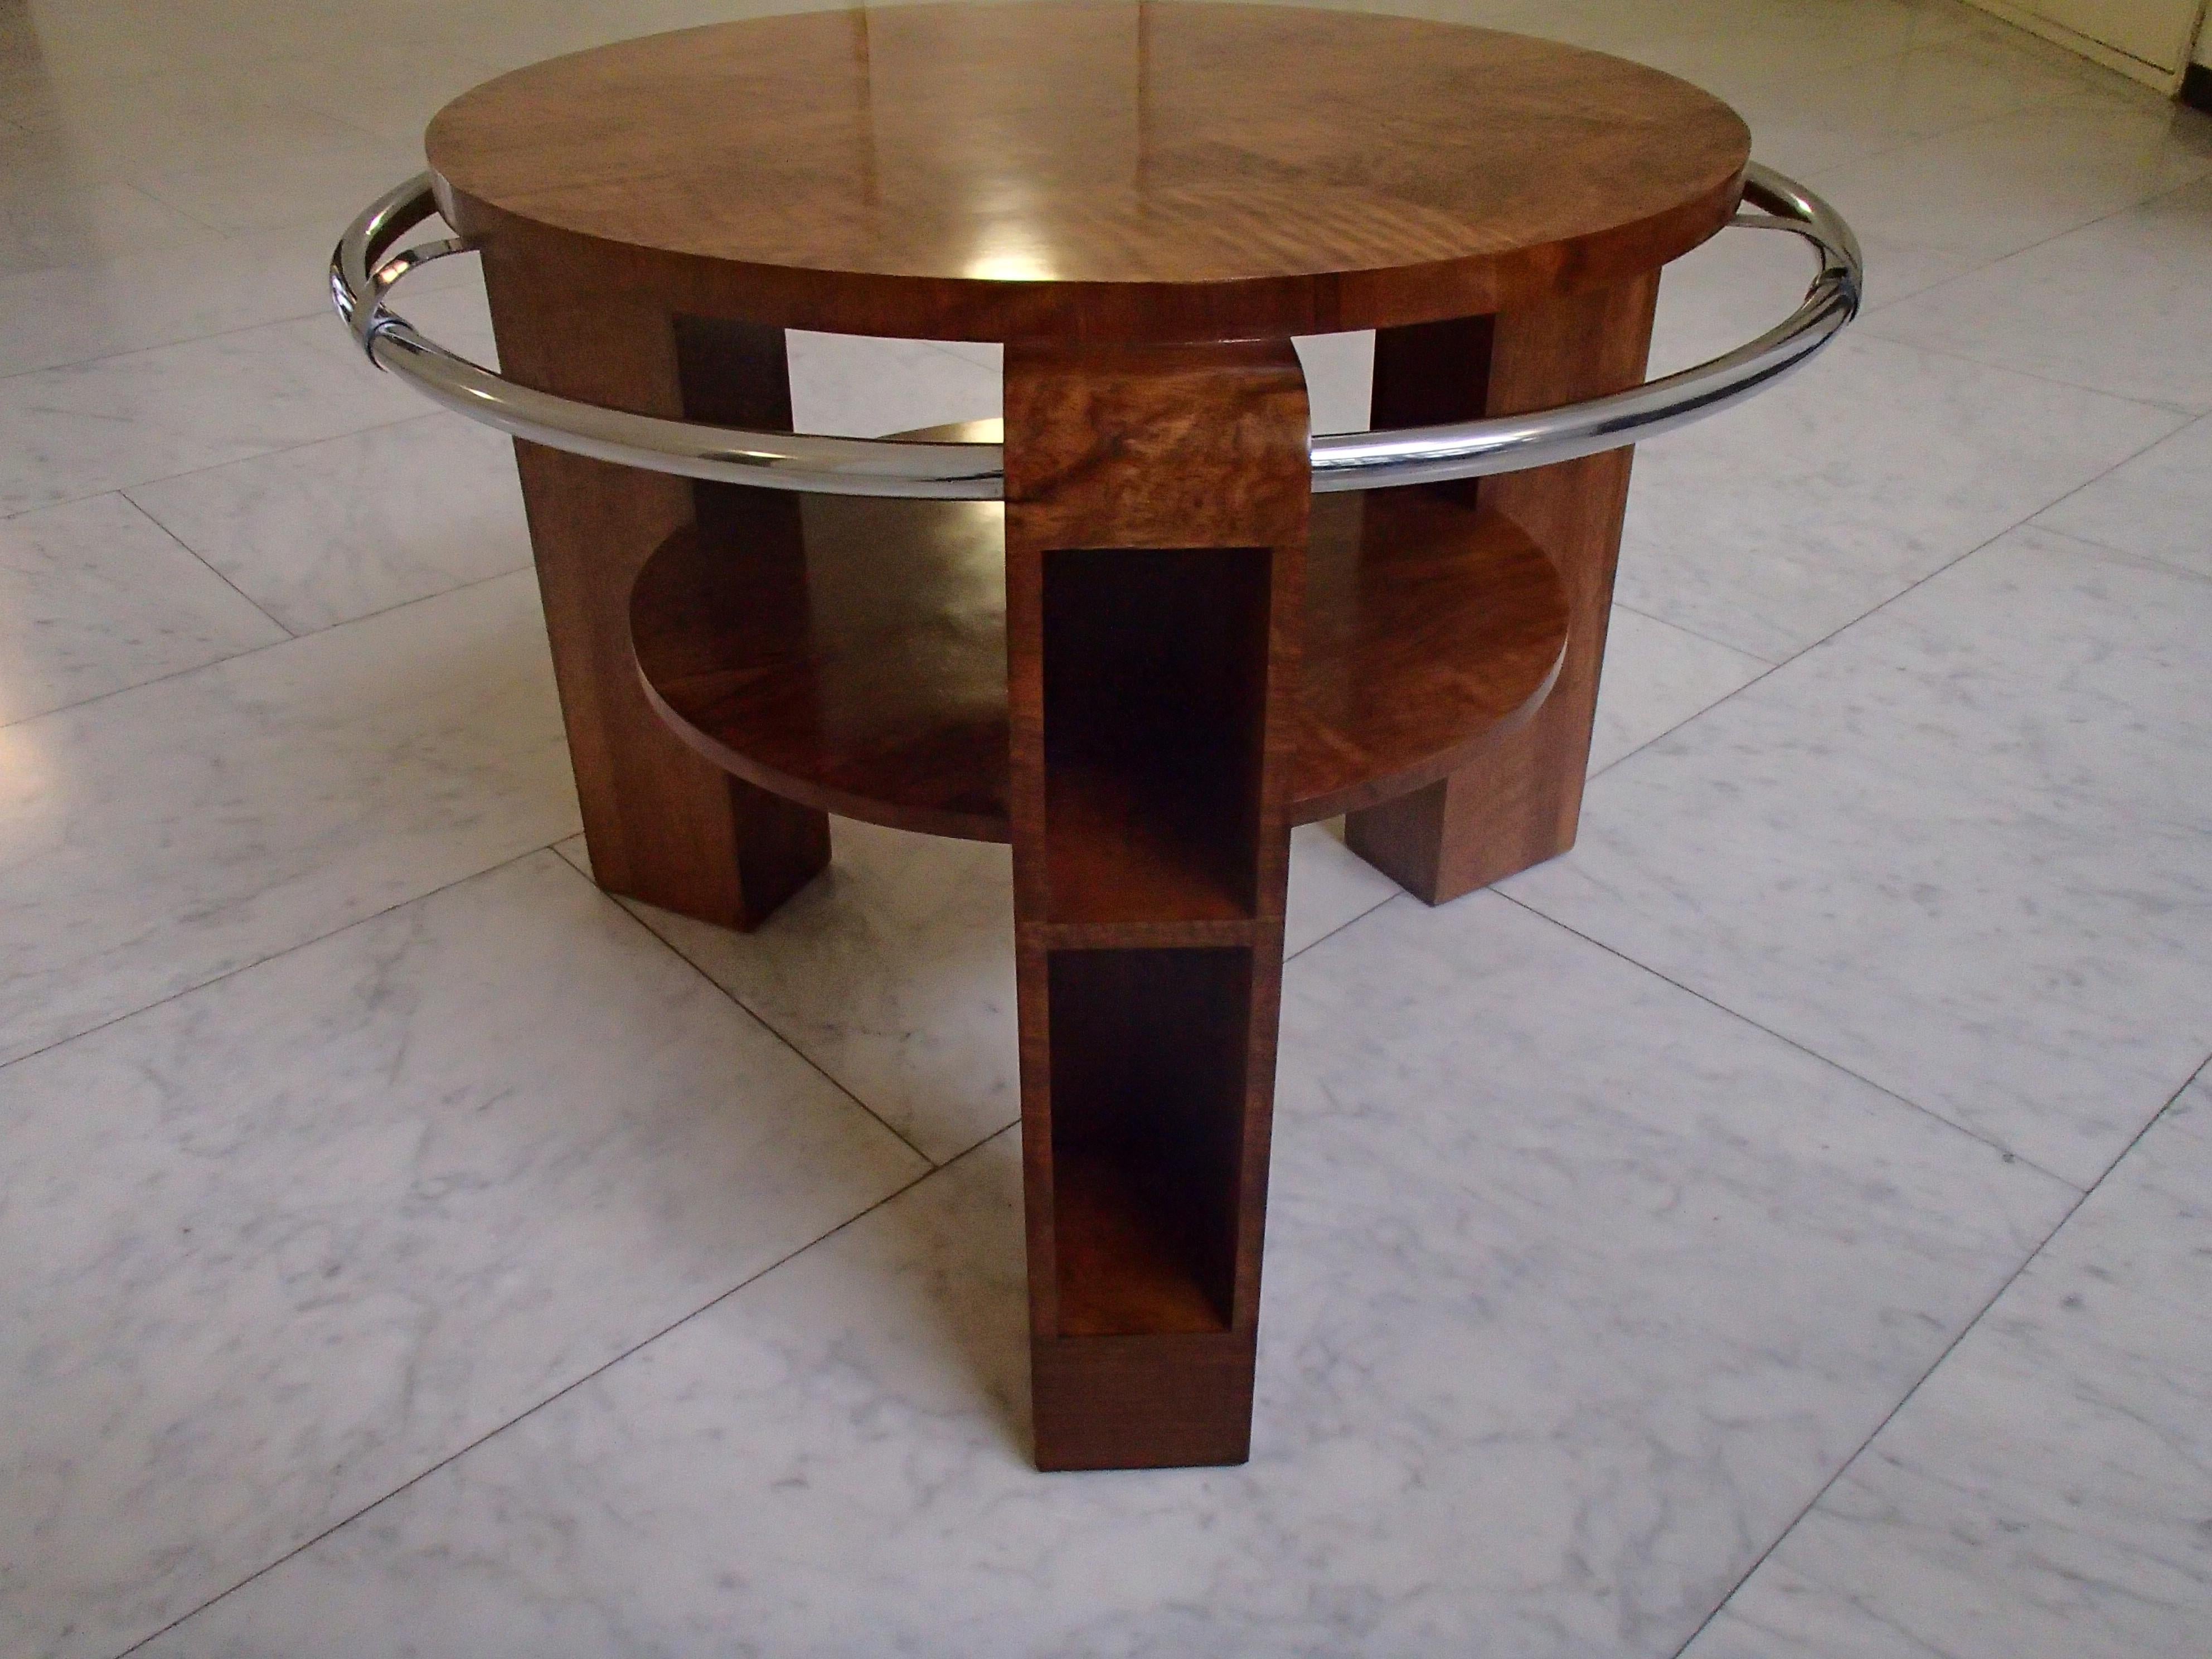 Art Deco coffee or sofa table walnut with chrome ring and shelf's in the legs completely restored
with shellac.